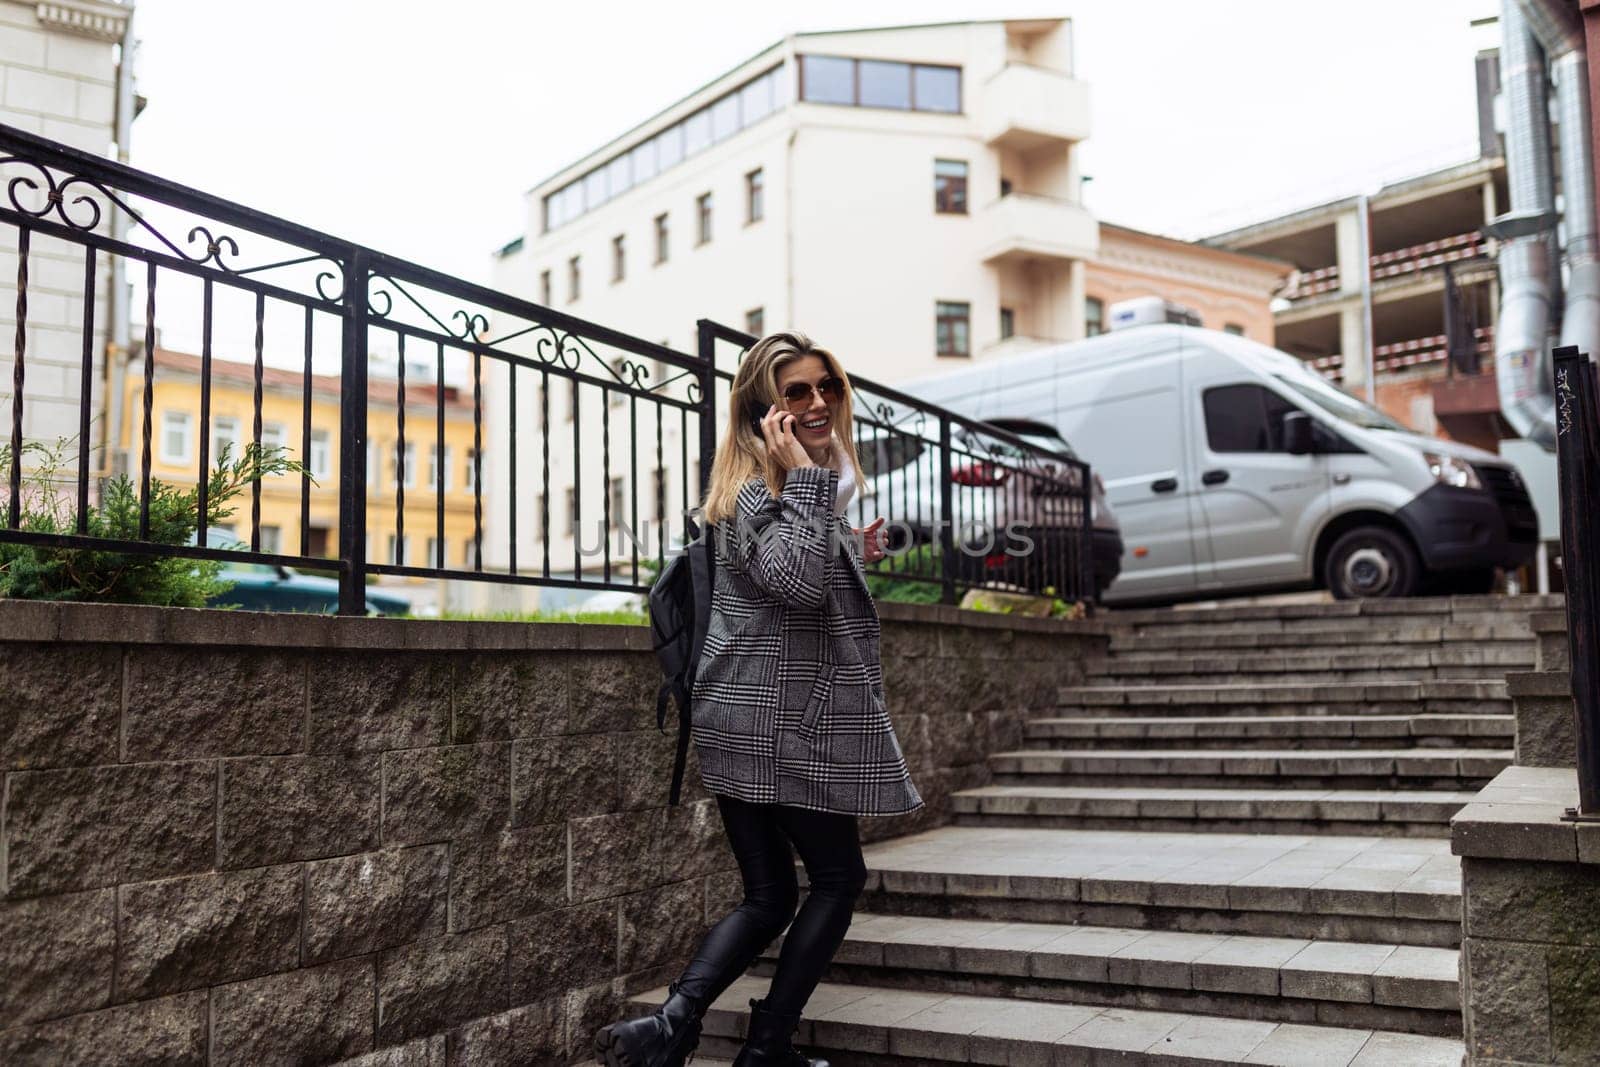 a woman climbs the stairs speaks on a mobile phone and turns around.